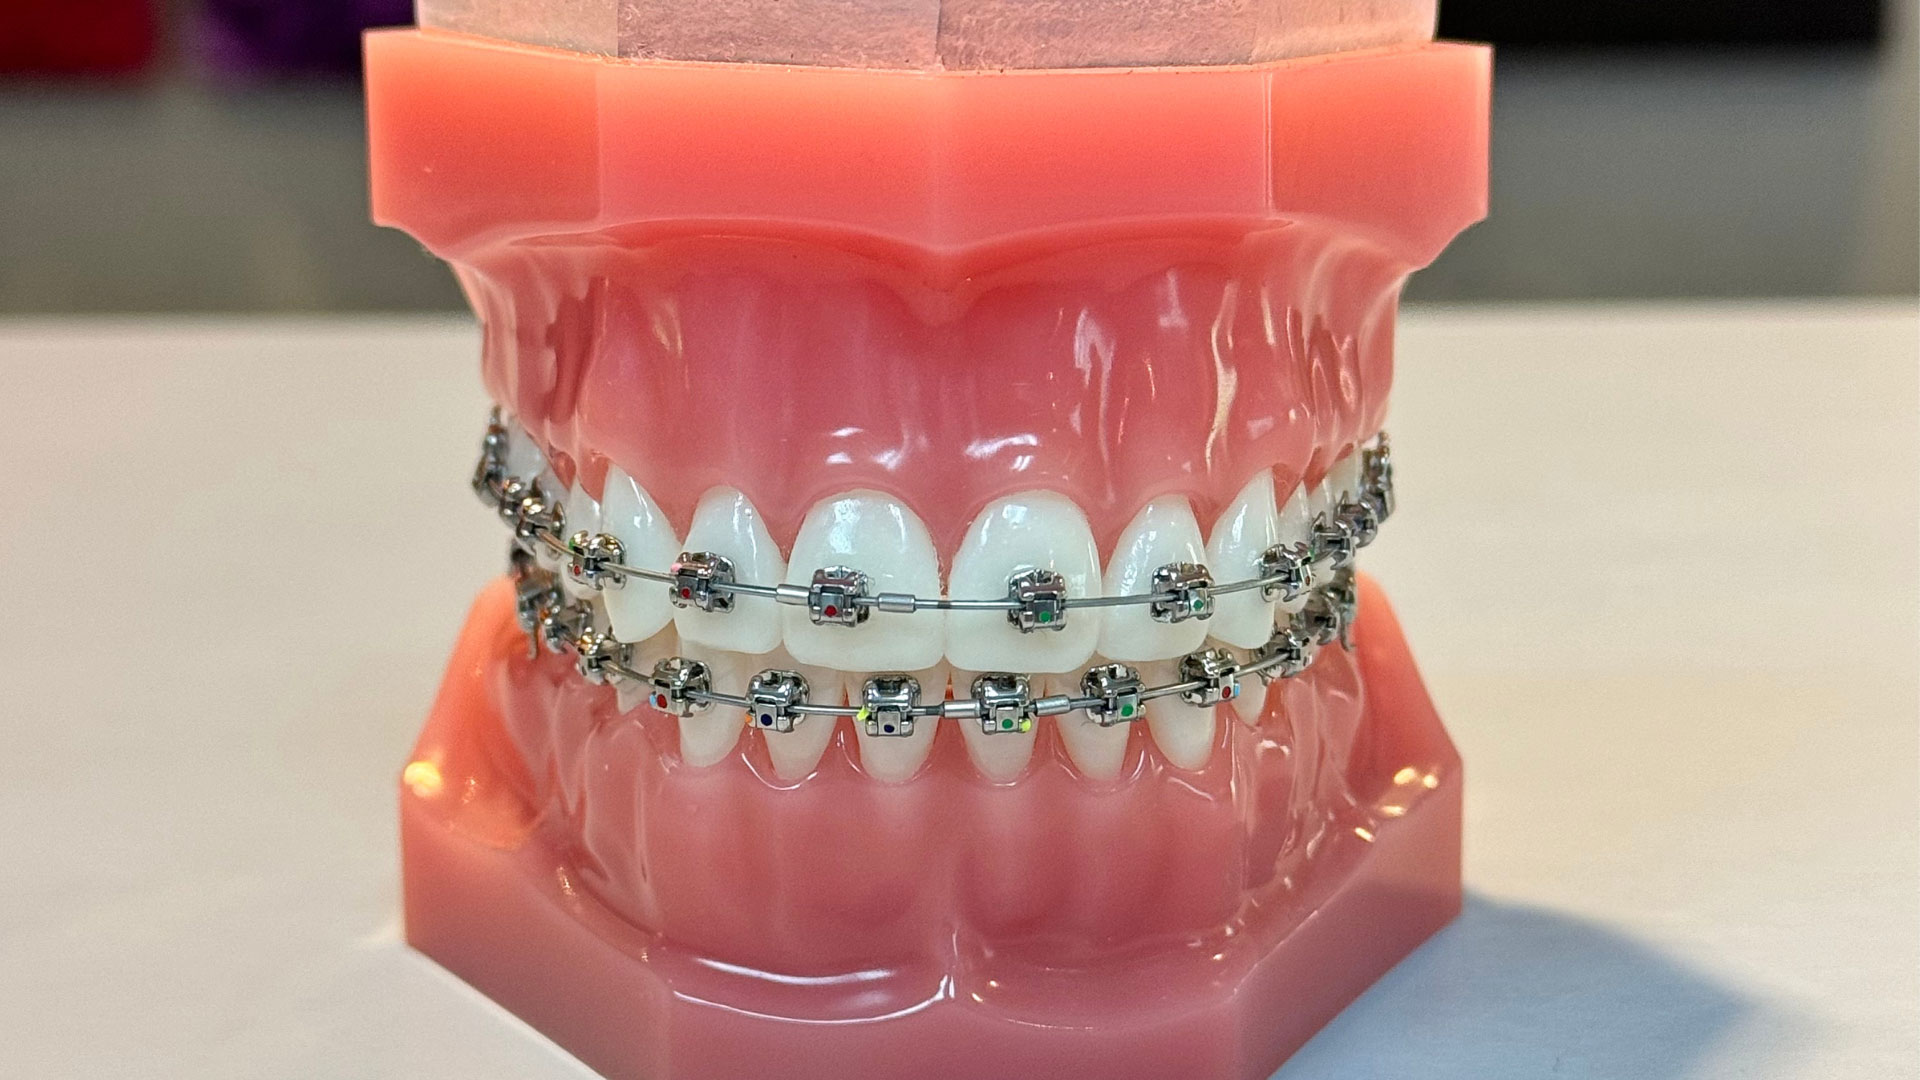 A close-up of a model of teeth with braces